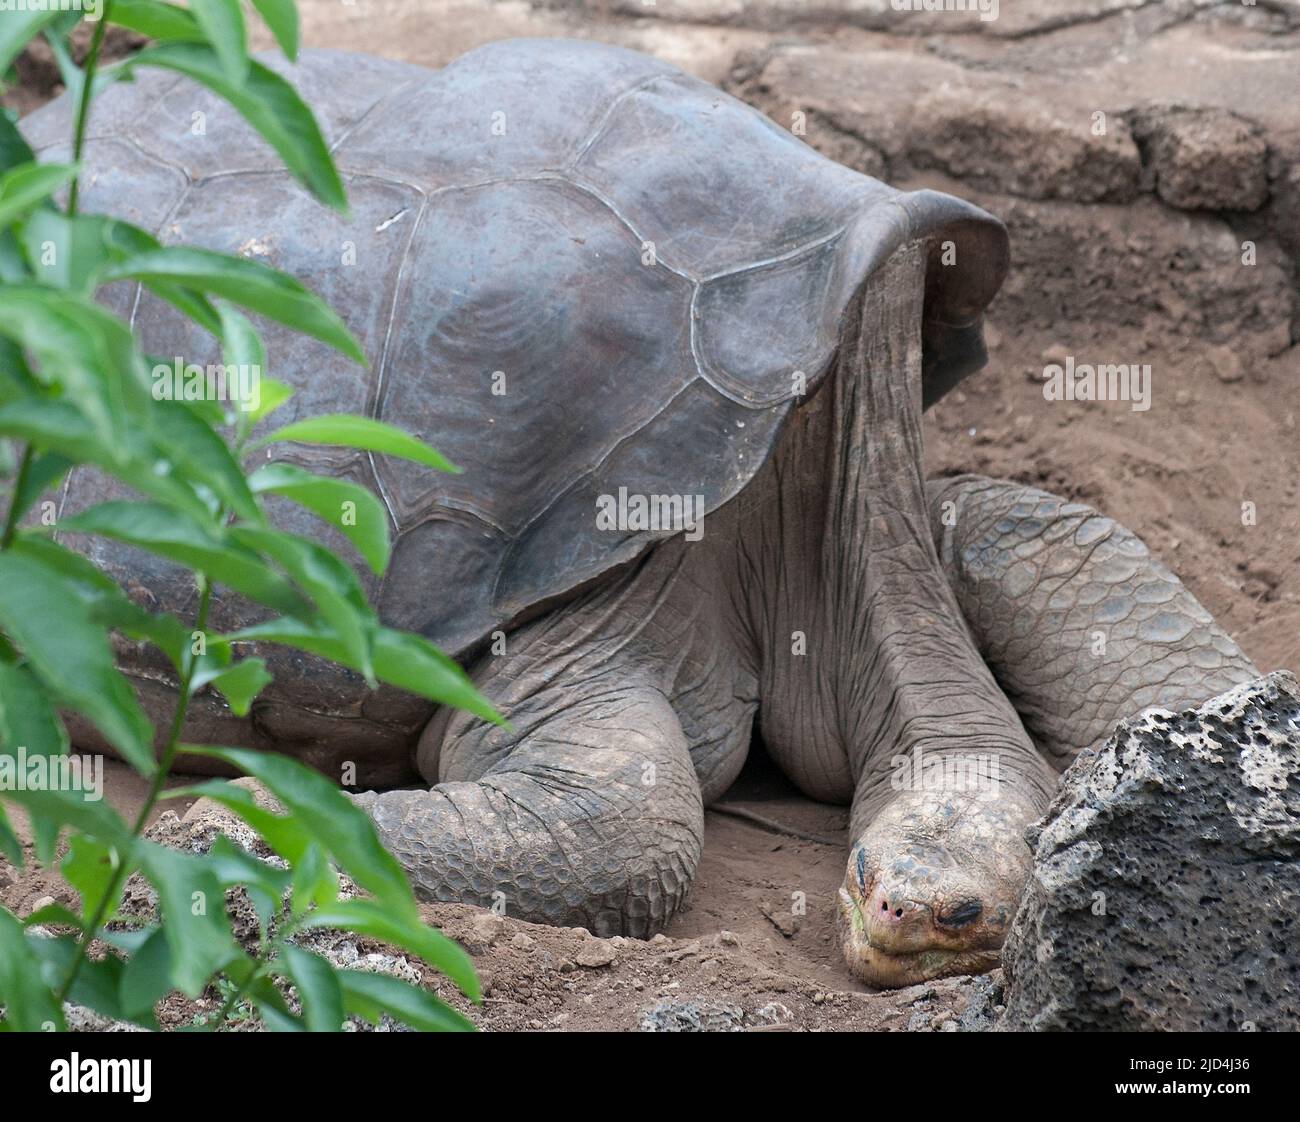 Lonesome George, the only surviving specimen of the giant tortoise of the species Chelonoidis nigra abingdoni that was one found on Pinta Island, Gala Stock Photo